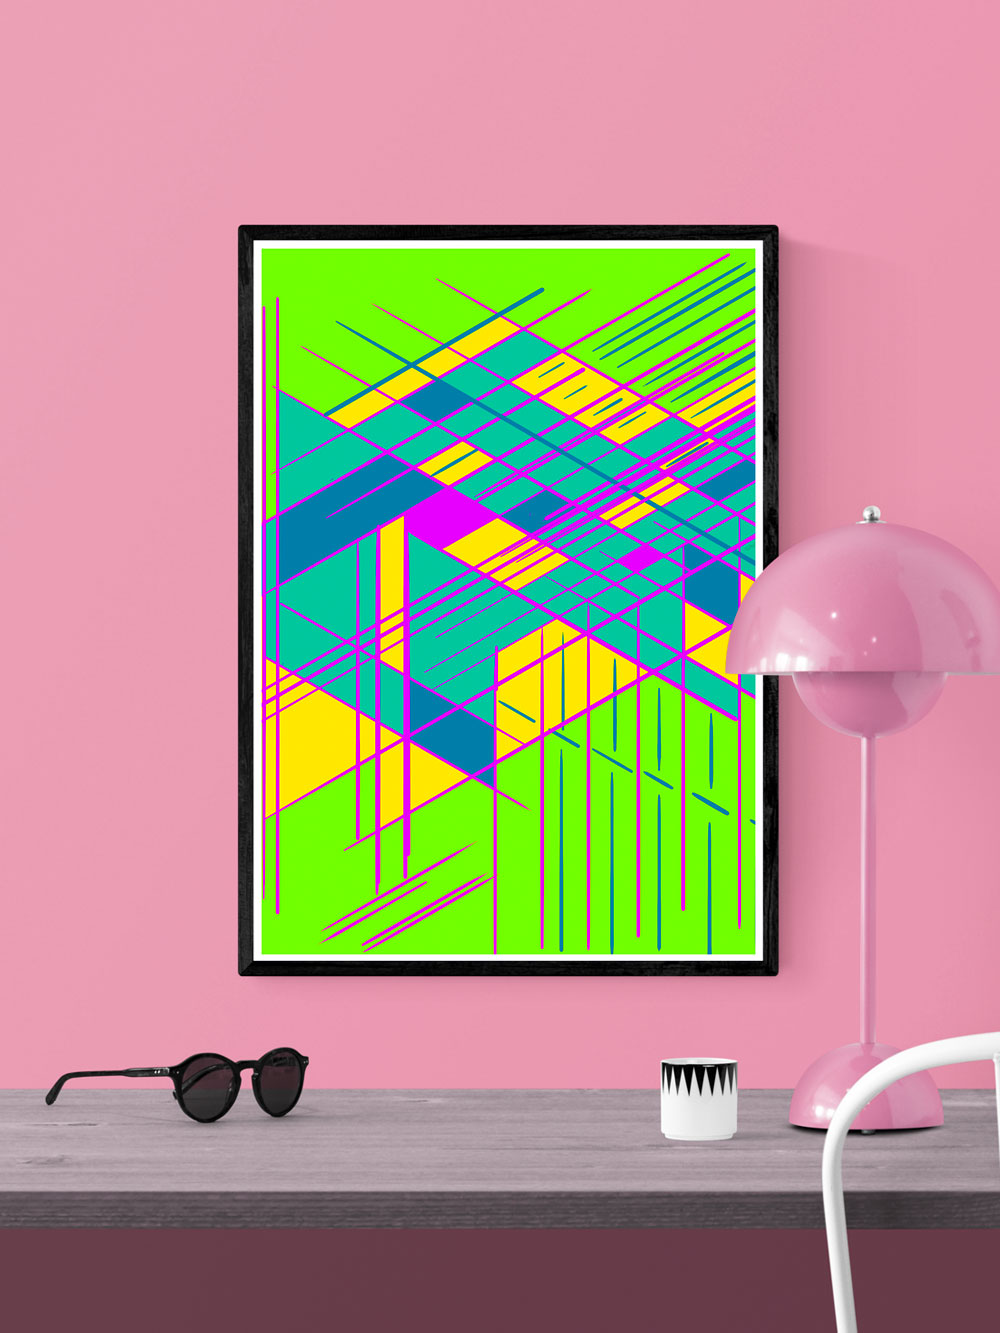 Guided Glitch Art Print in a frame on a wall